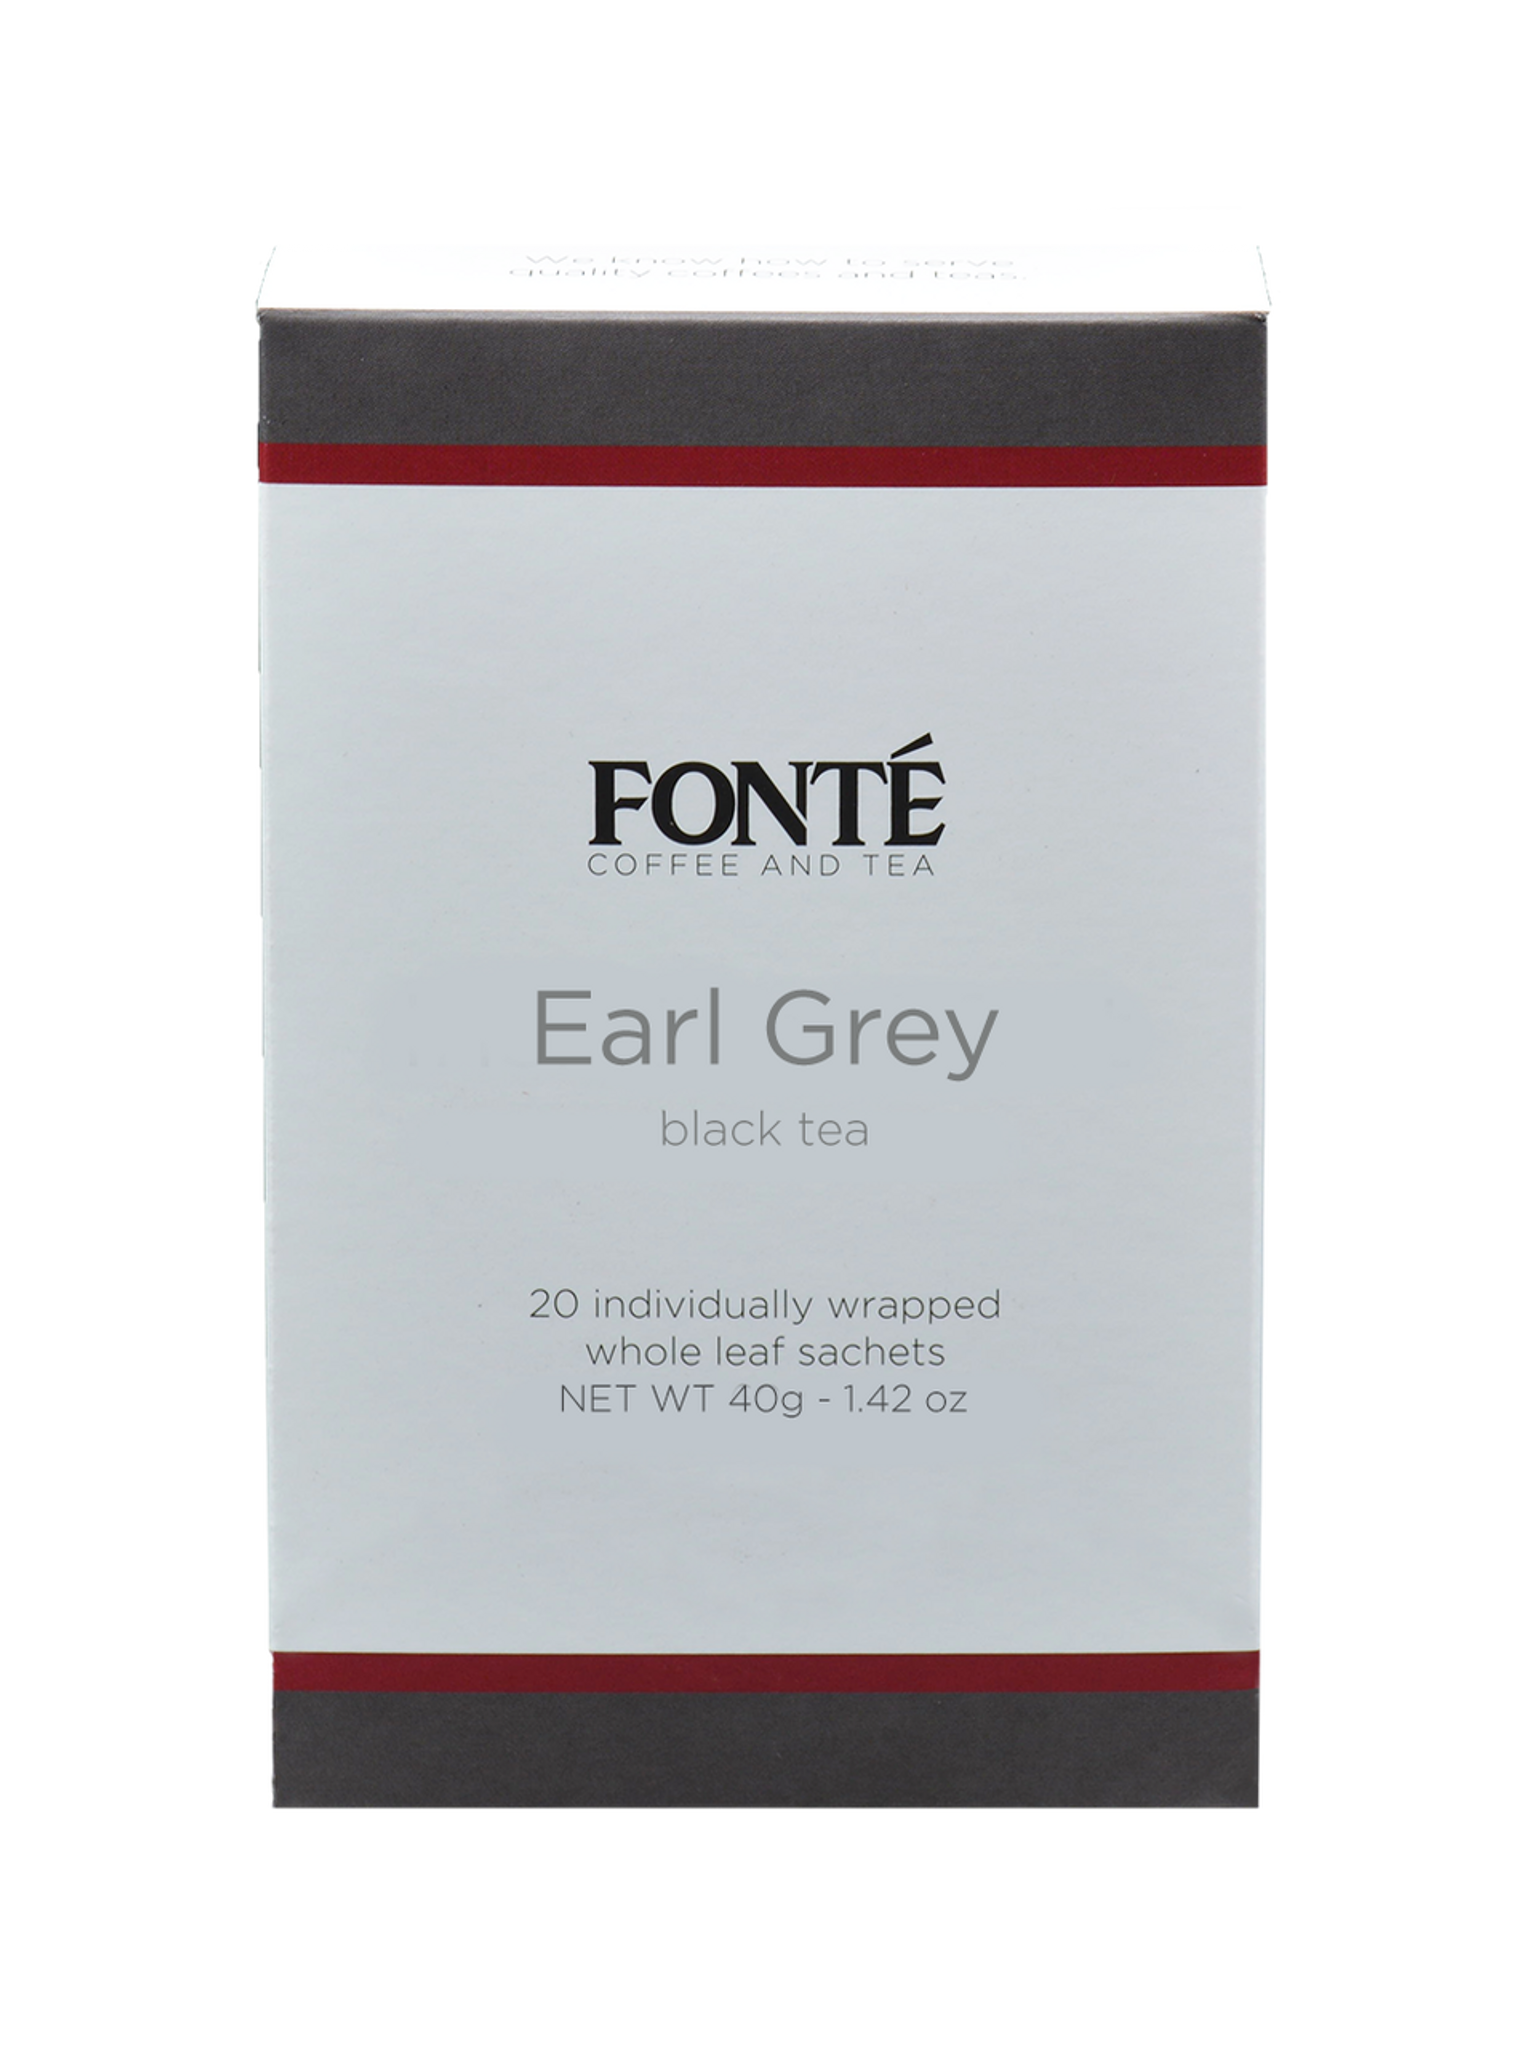 Buy Fonte Earl Grey Specialty Black Tea Available for Weekly, Biweekly, Monthly or Bimonthly Subscriptions 